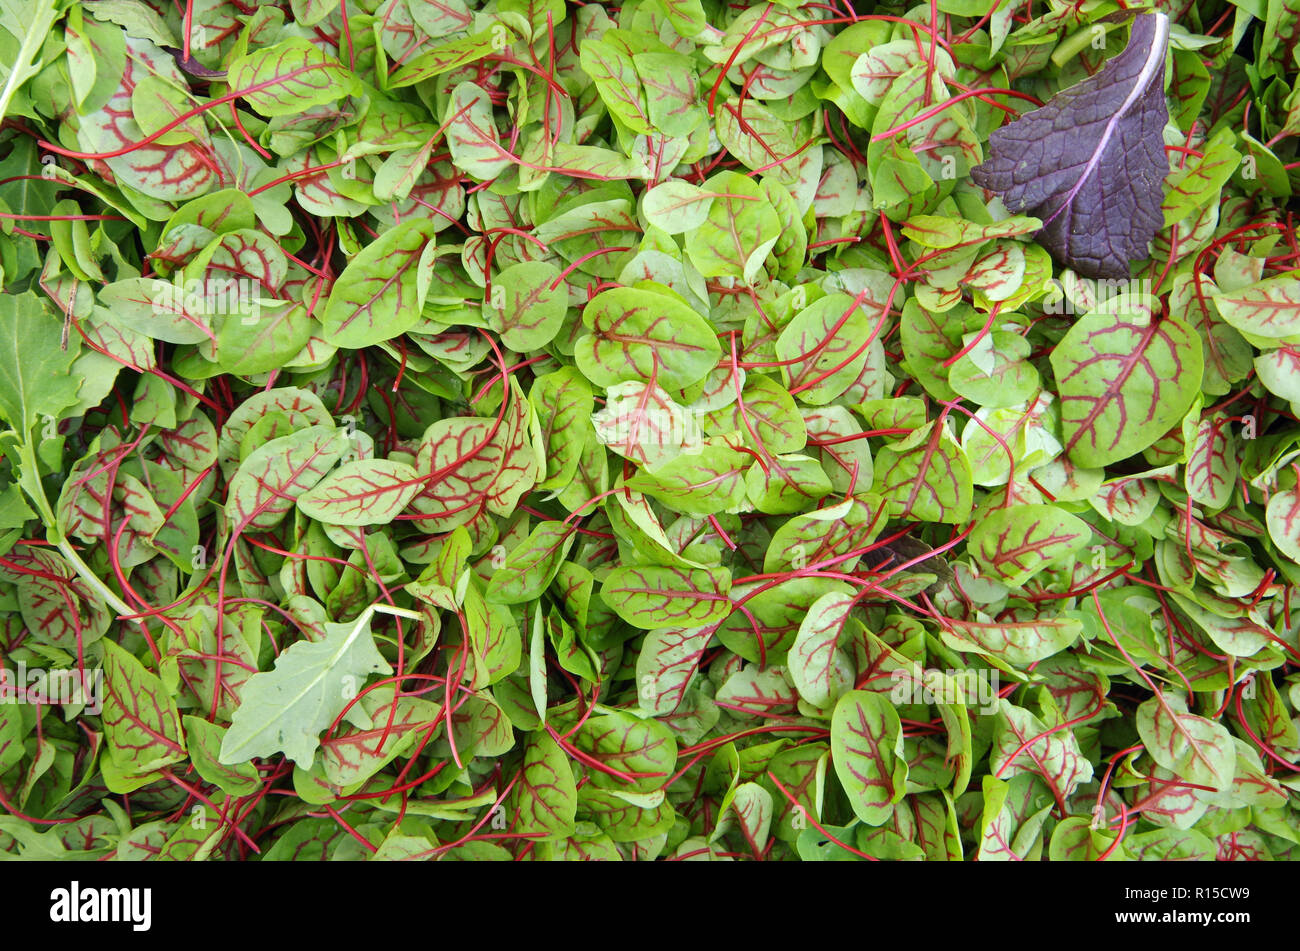 Sorrel red veined baby micro greens view from above Stock Photo